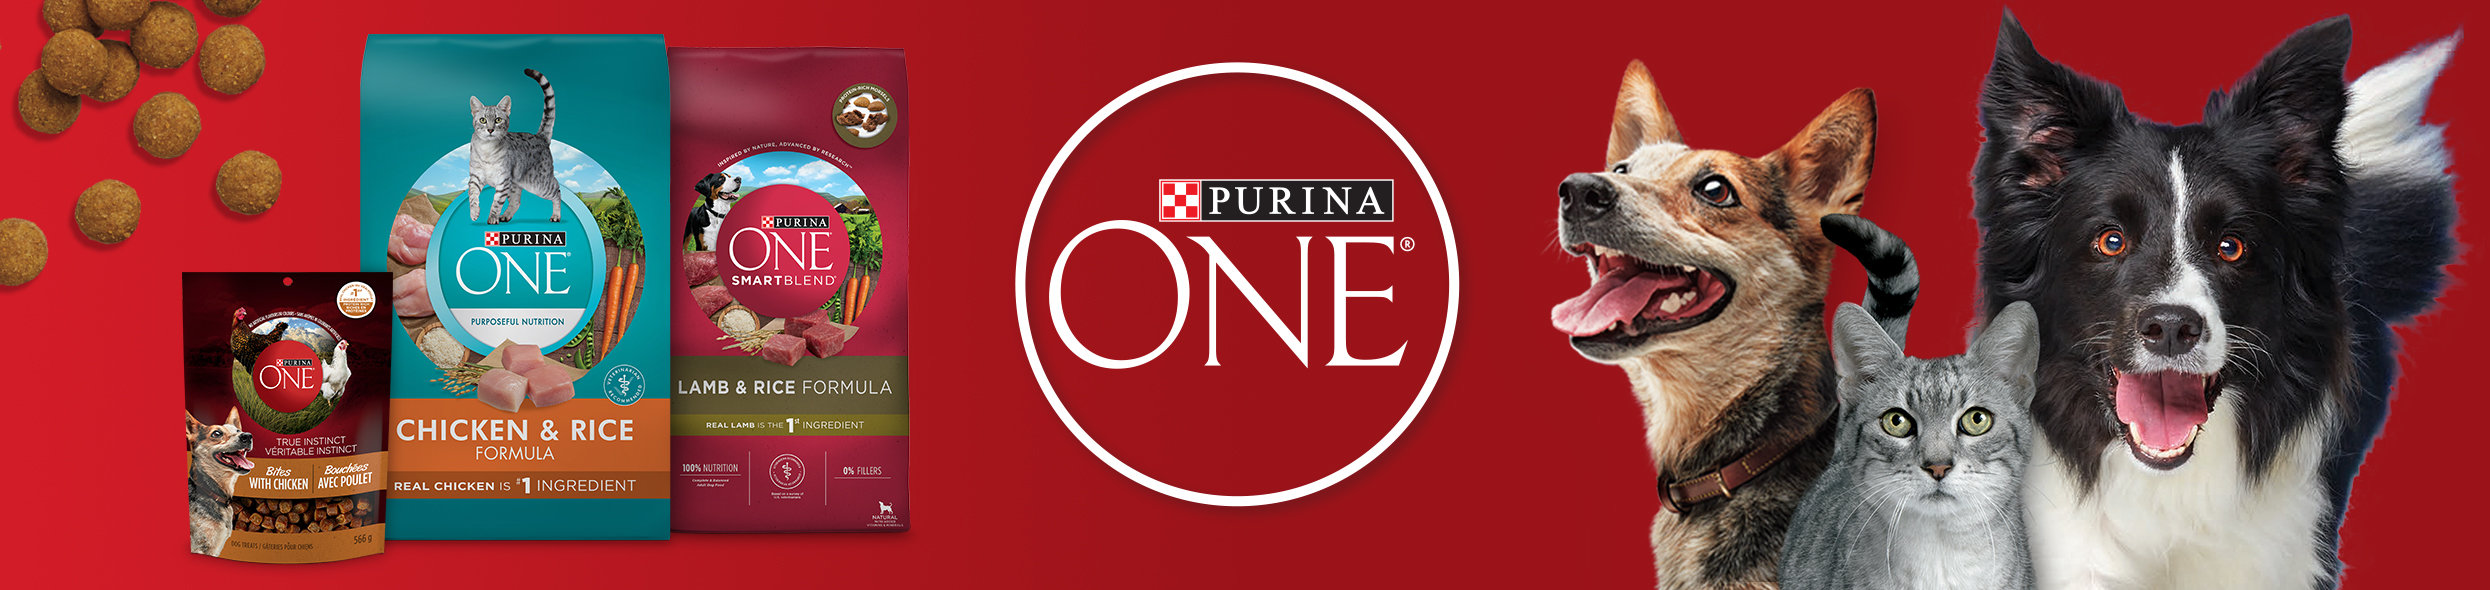 Purina One Banner